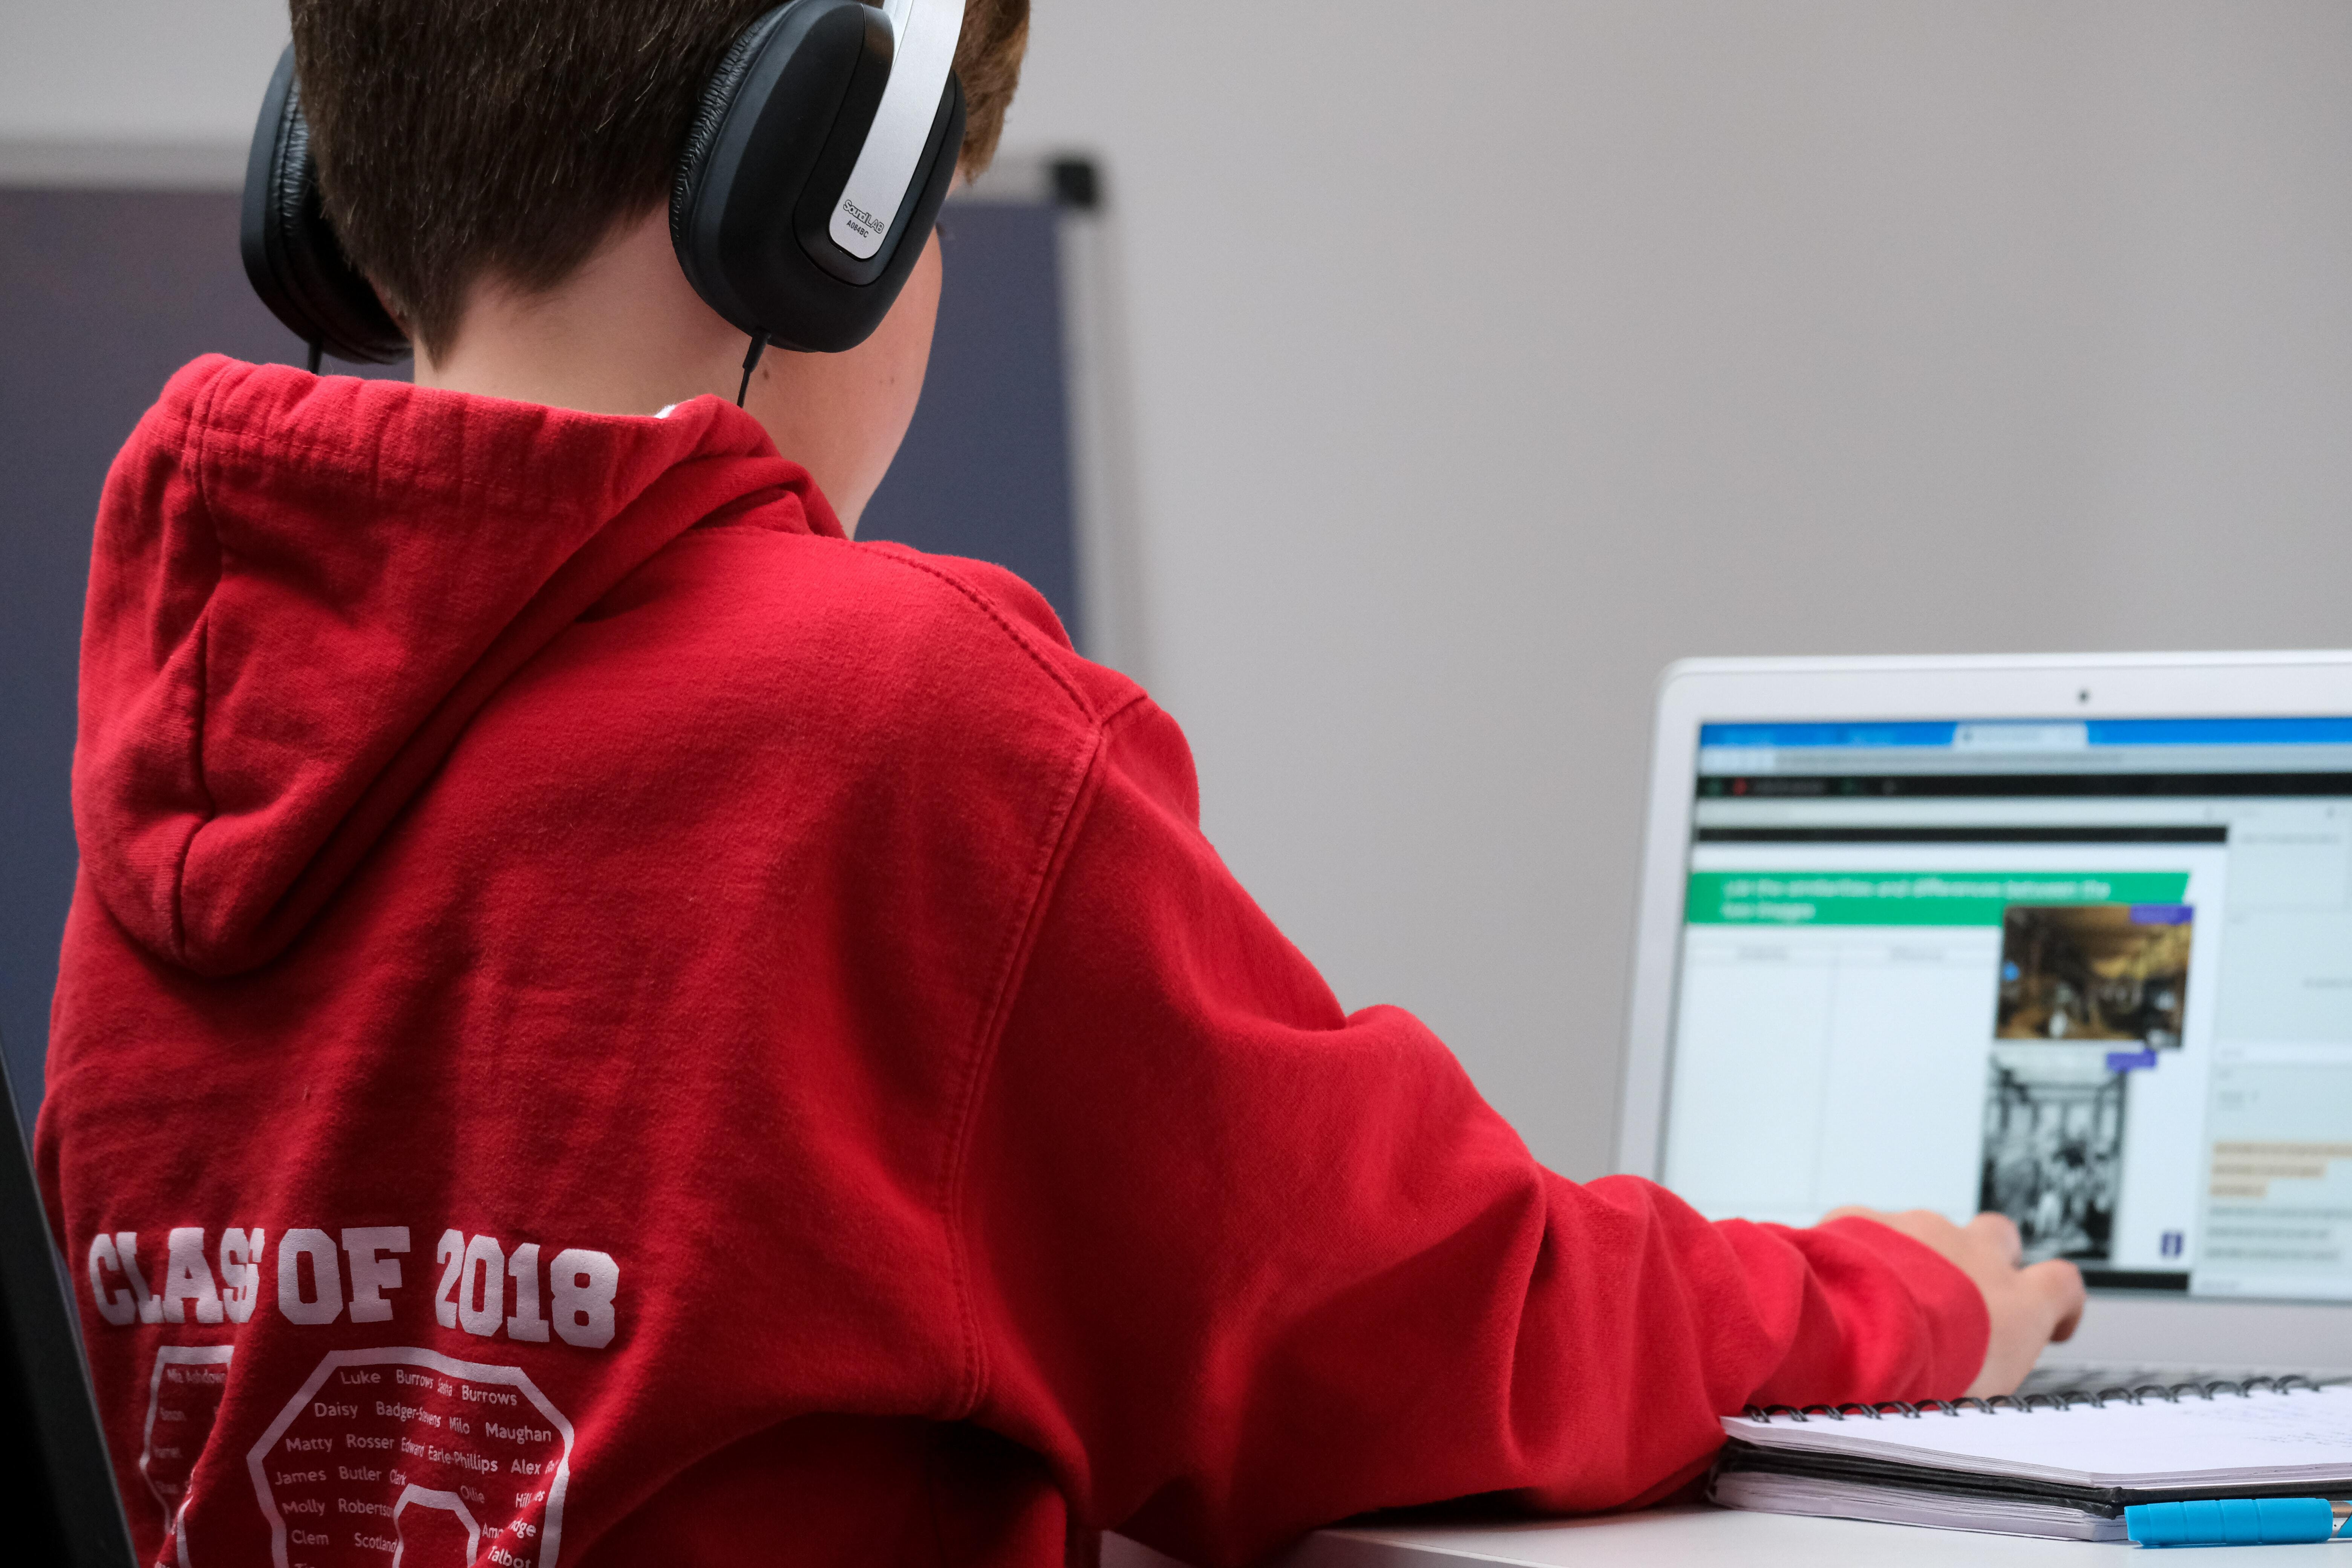 A child wearing headphones pressing a laptop